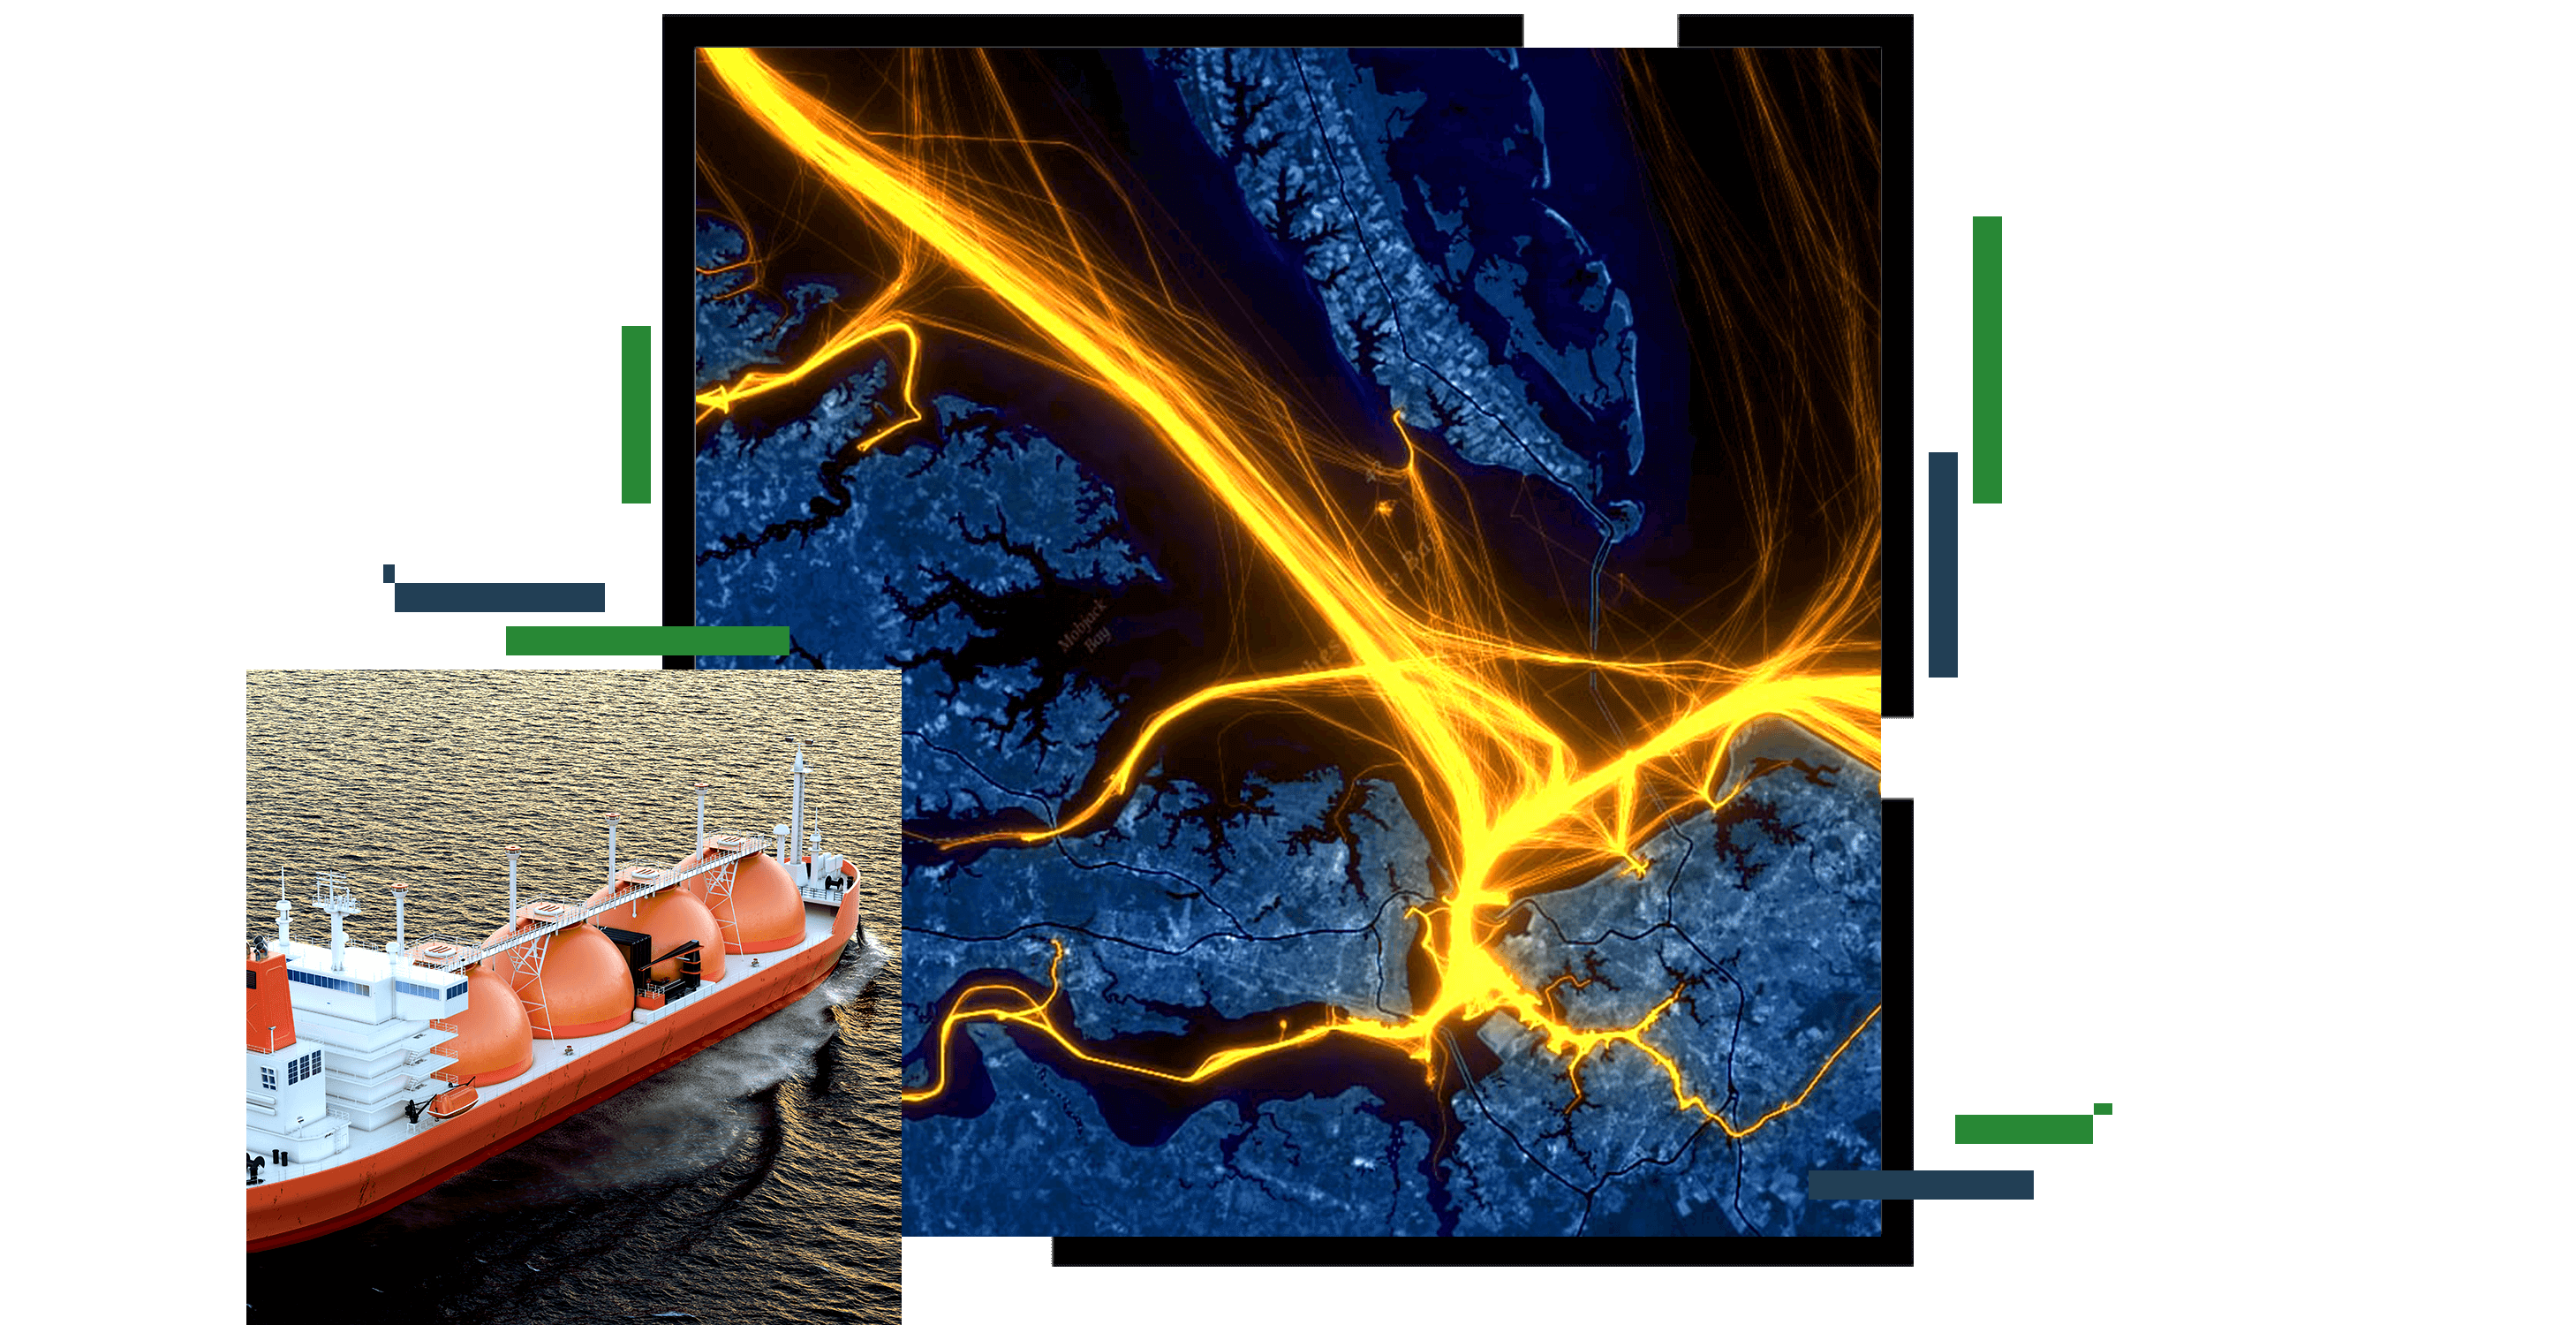 A map of a large waterway in dark blue and black with shipping lanes shown in glowing yellow, beside a photo of an orange and white liquid natural gas carrier ship moving through choppy black waters